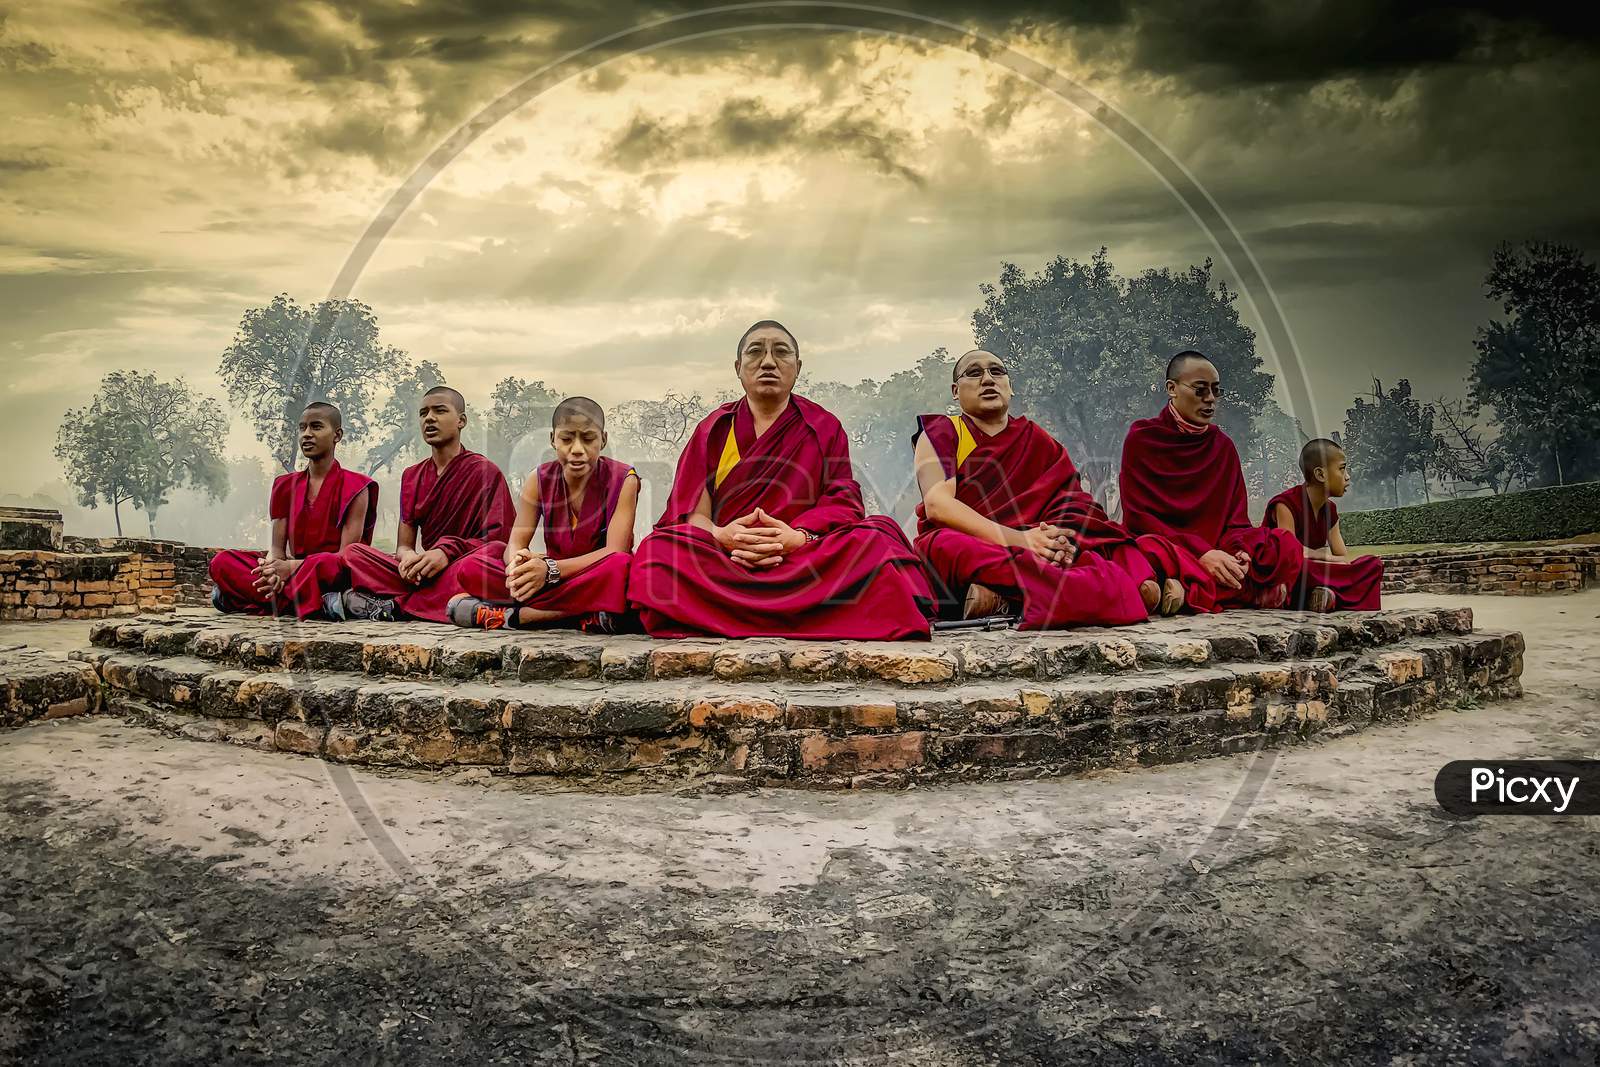 Buddhist monks in meditating at the holy place at the deer park in Sarnath where Gautama Buddha first taught the Dharma, and where the Buddhist Sangha came into existence.